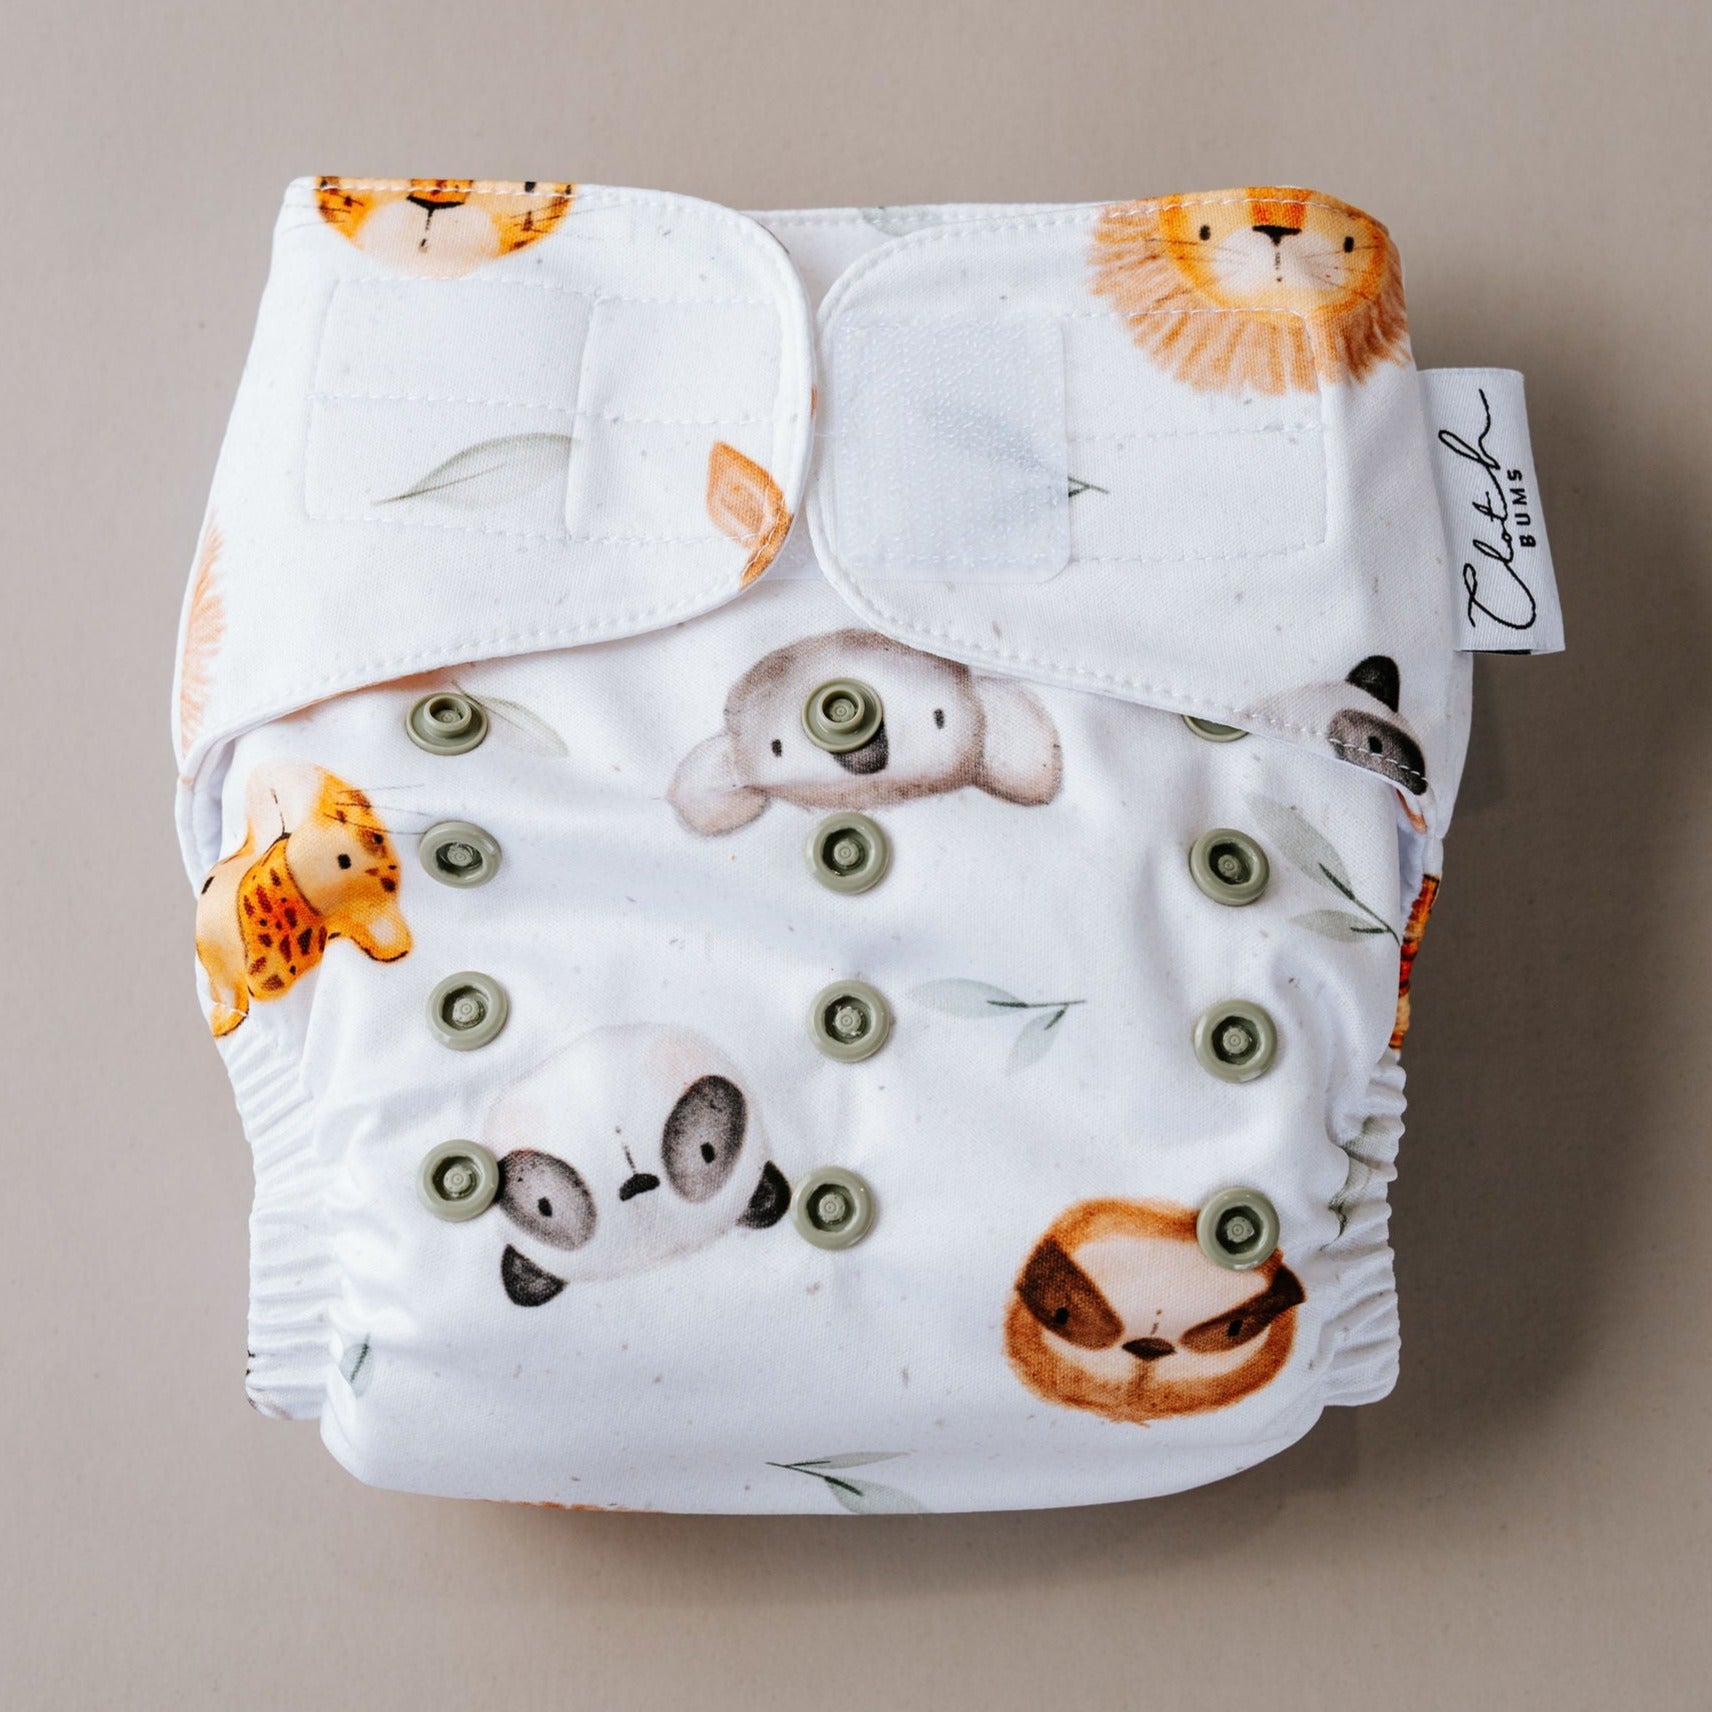 Velcro PIXIE One Size Fits Most Cloth Nappy - Peek A Zoo